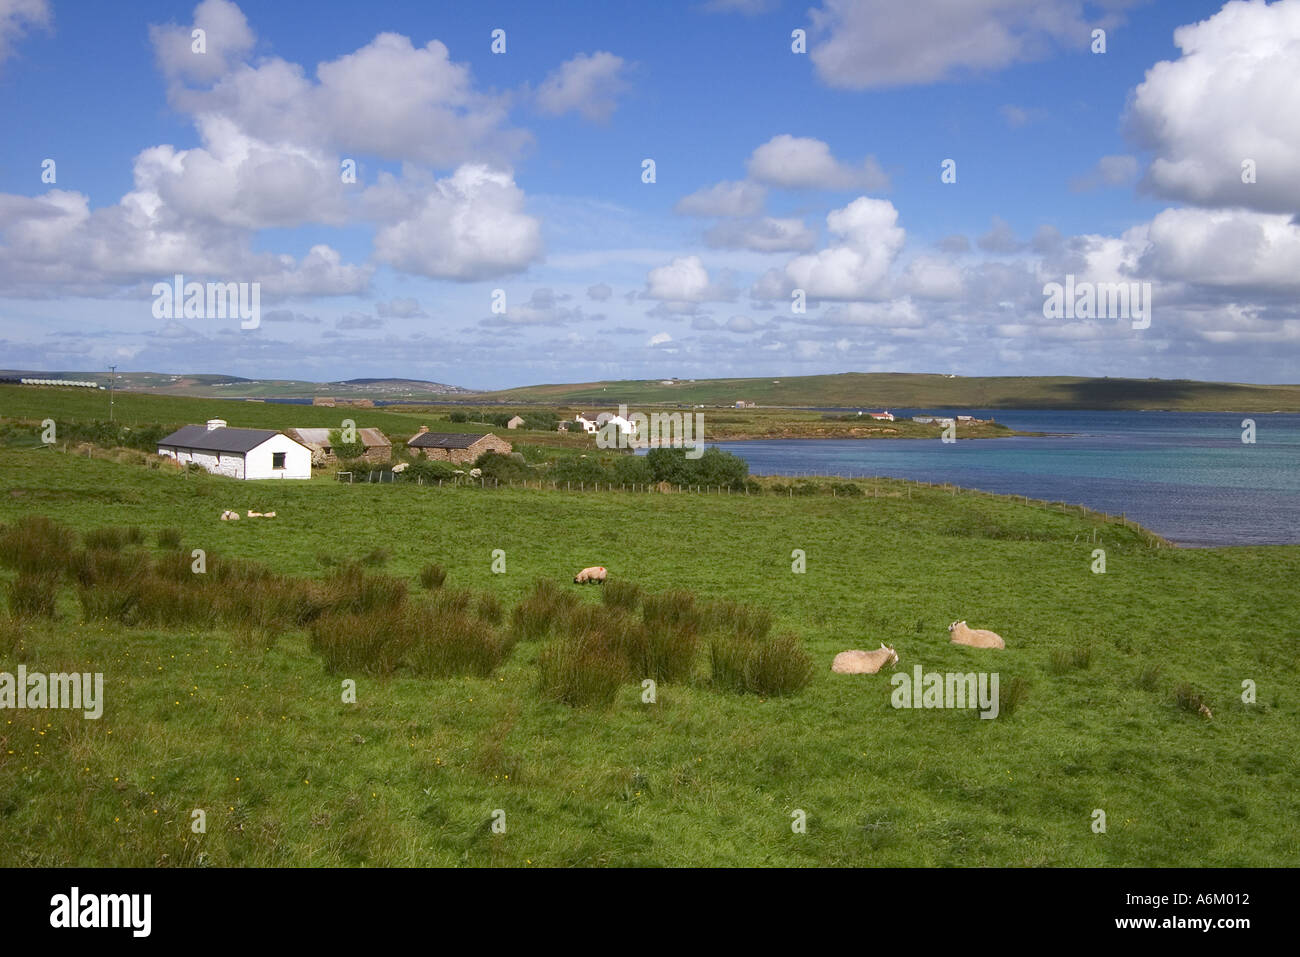 dh Bay of Quoys HOY ORKNEY Field sheep grazing spike rush sedge houses Burra Sound and Graemsay island Stock Photo